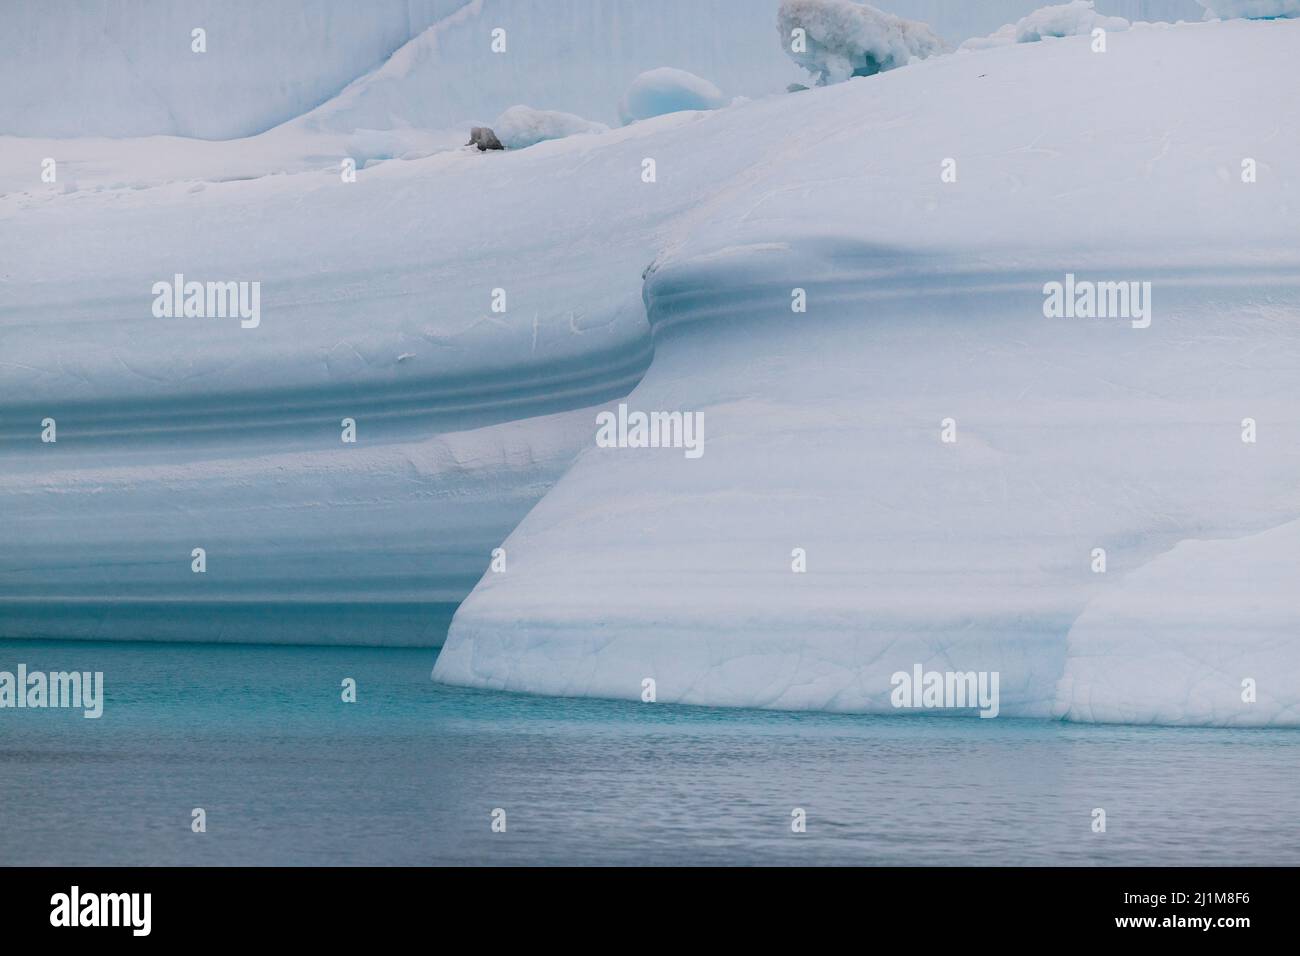 lines and textures of big icebergs Stock Photo